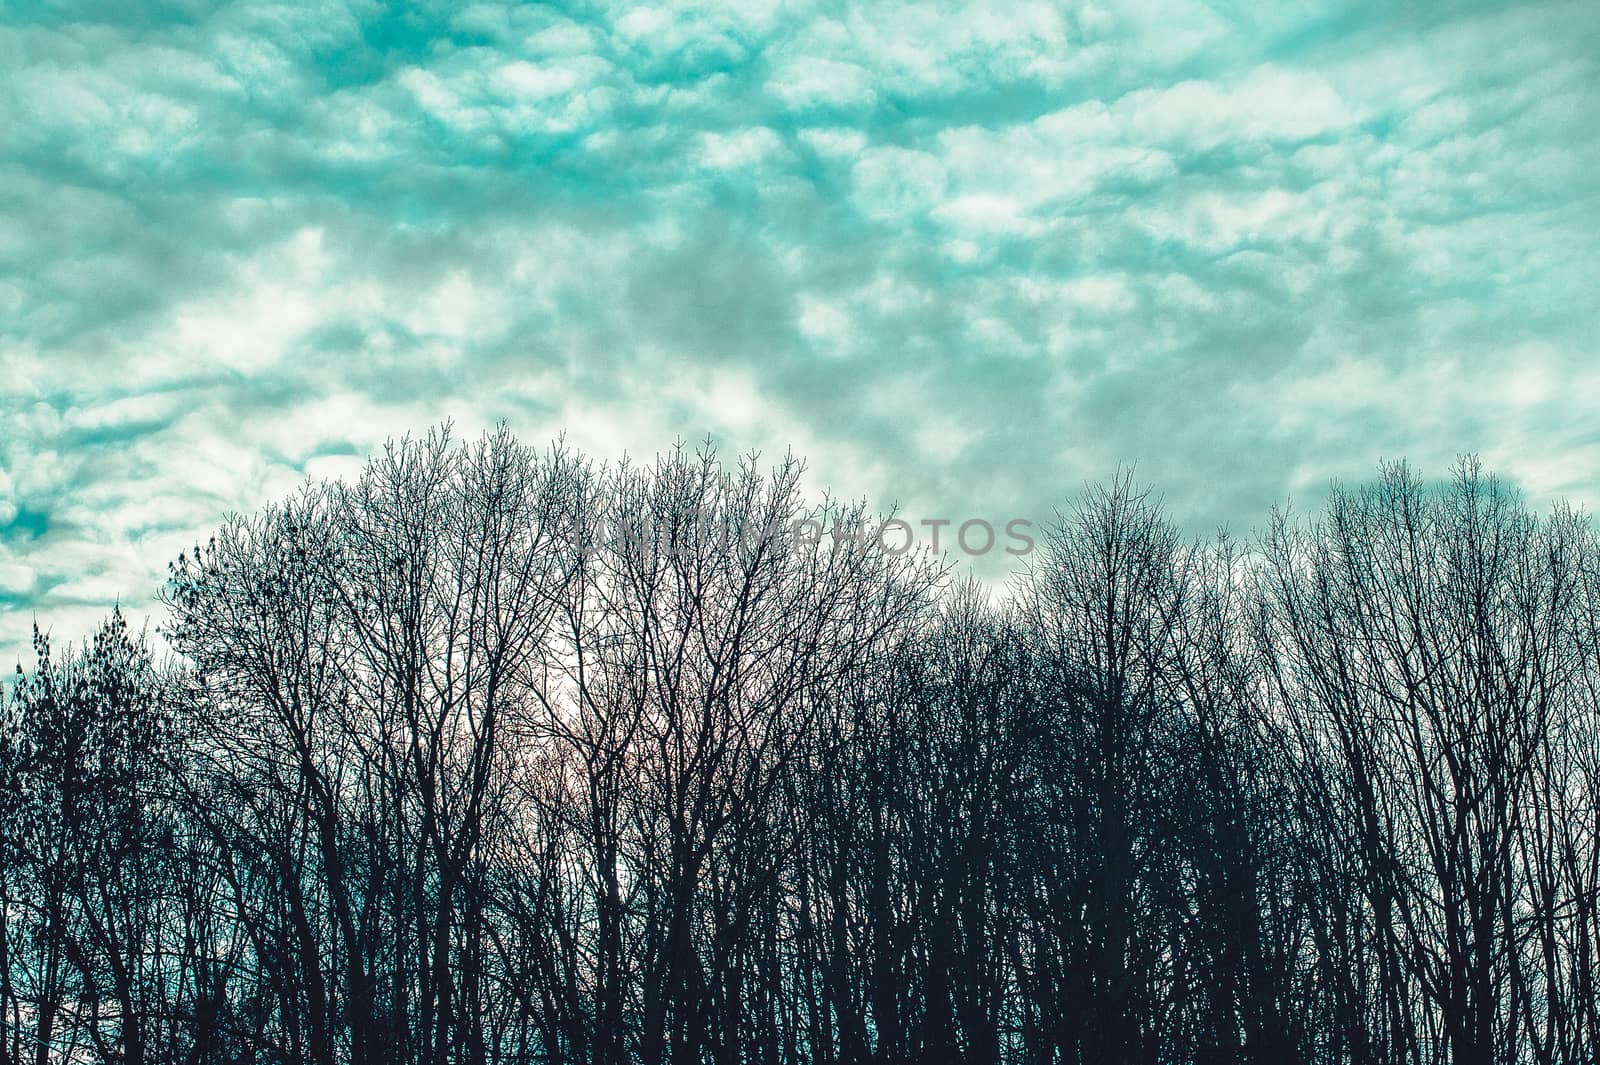 gloomy trunks and tree branches without foliage against a blue sky with clouds by chernobrovin